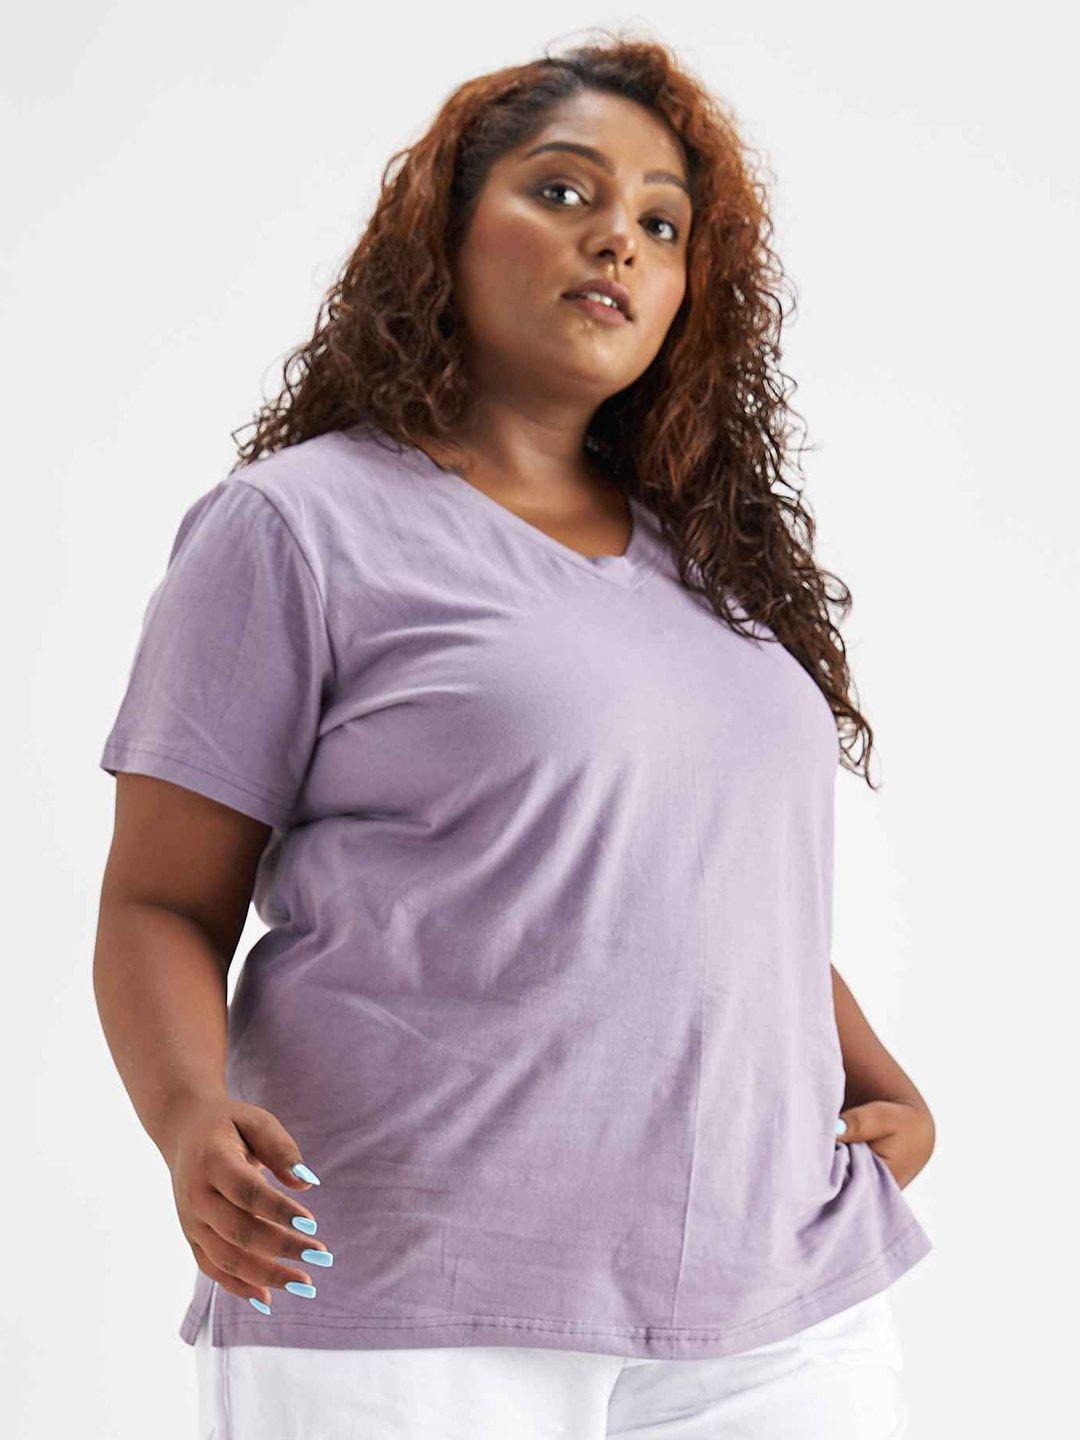 spirit animal plus size v-neck lightweight and breathable pure cotton sports t-shirt